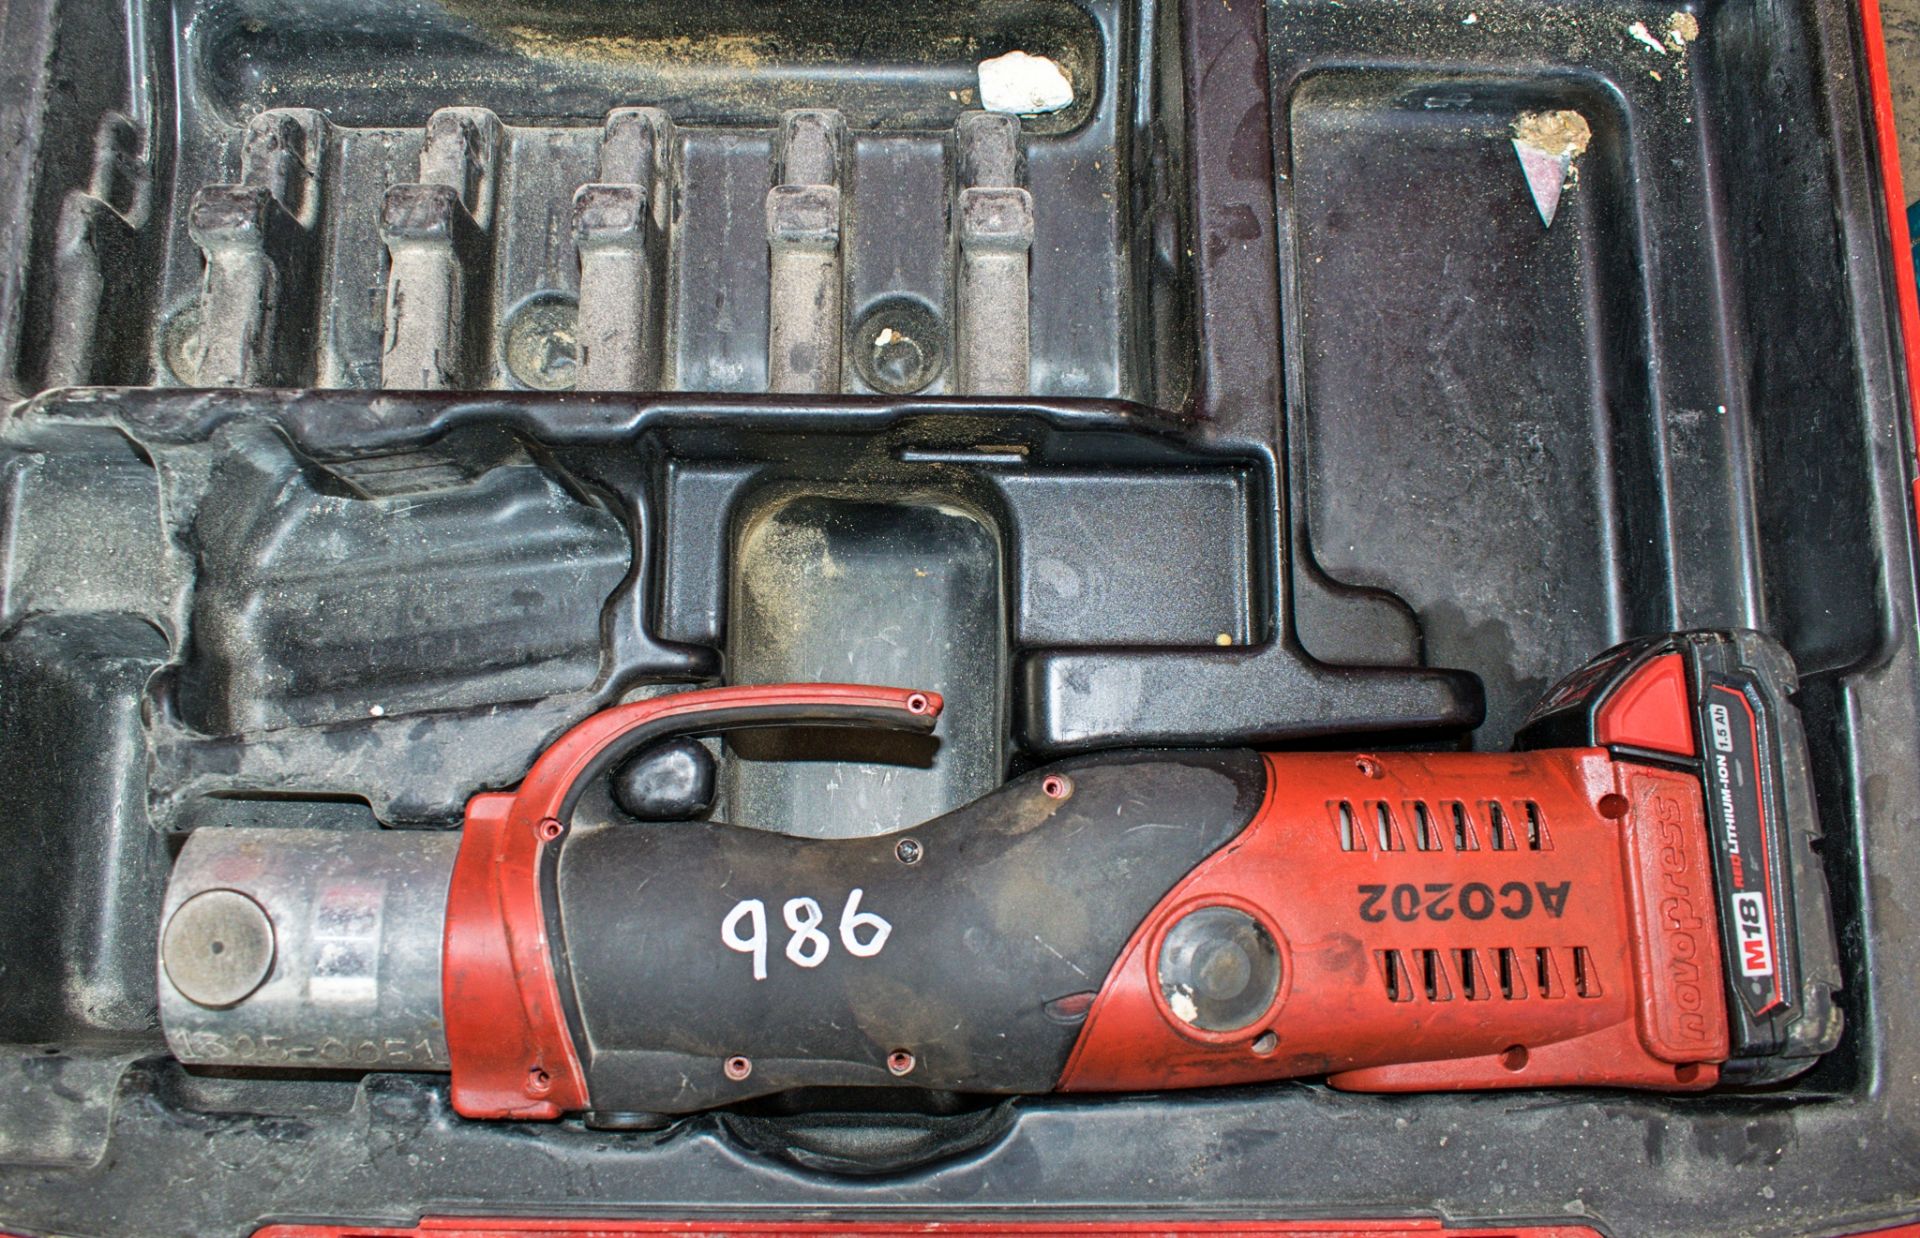 Novopress cordless crimping tool c/w battery & carry case ** No charger **